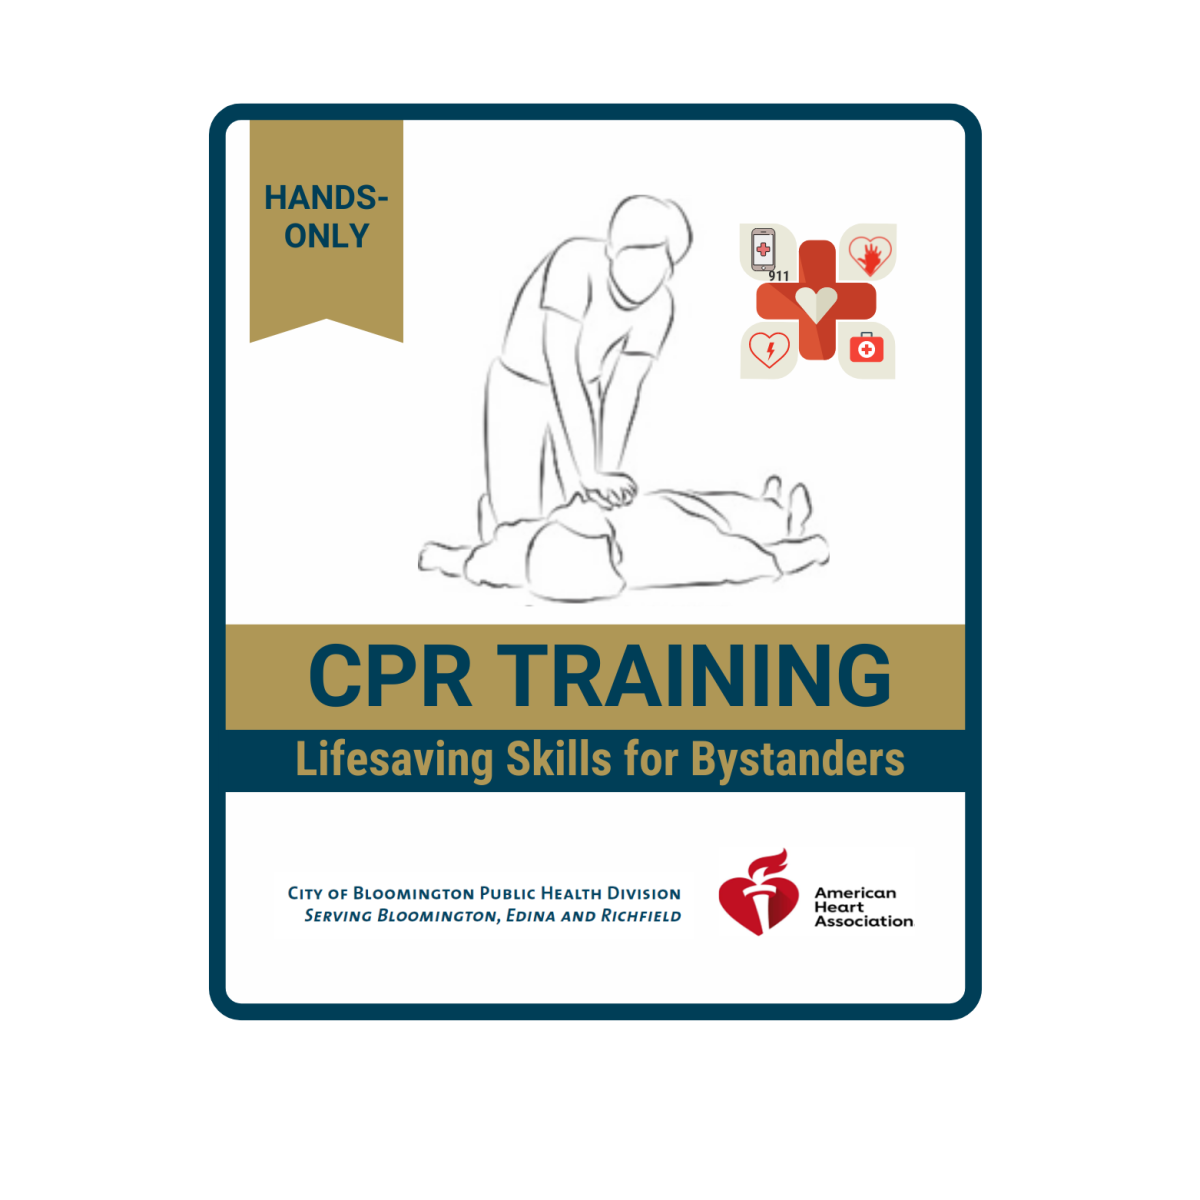 CPR training promotion